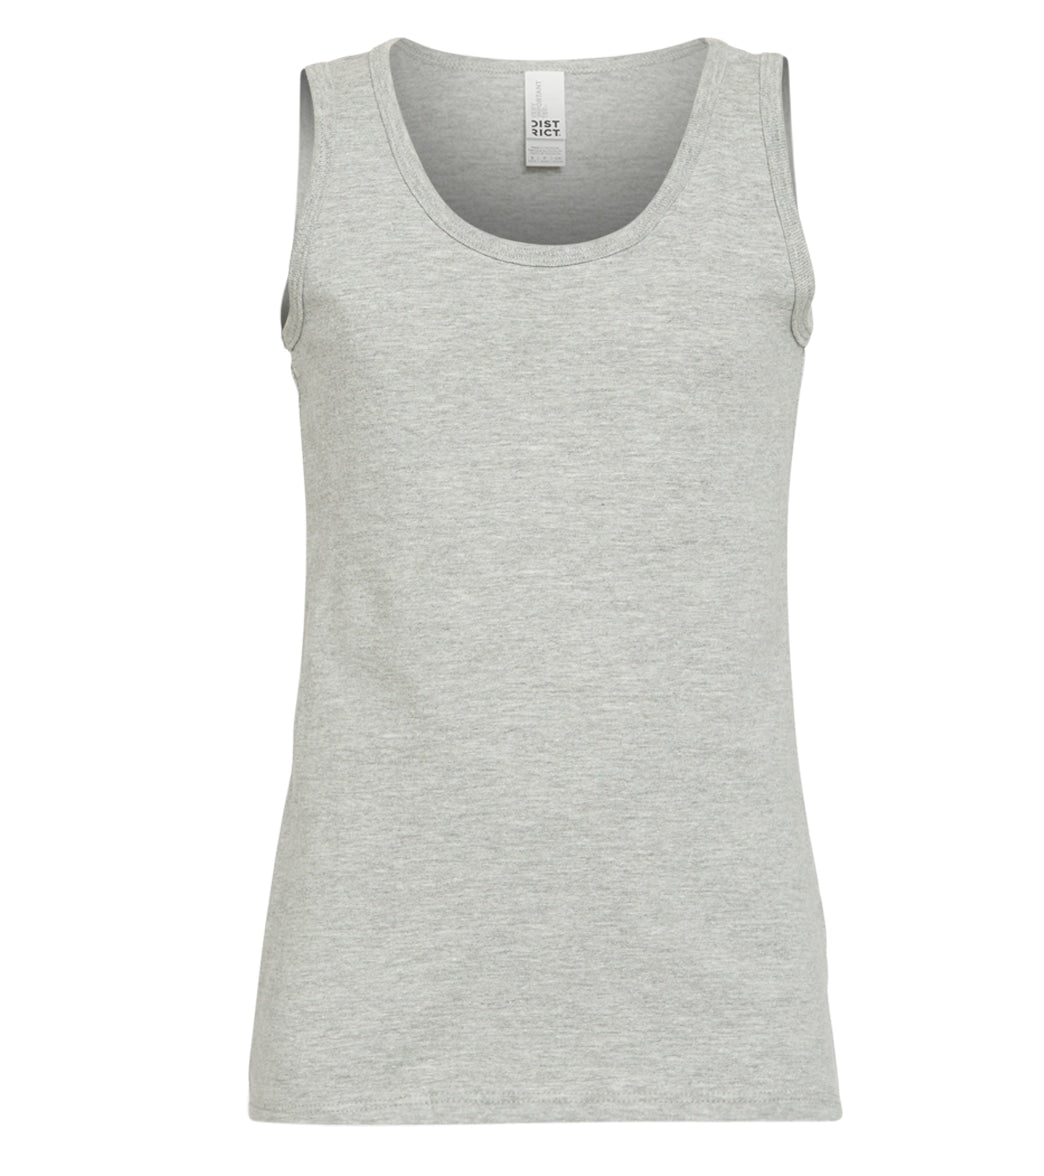 Girl's Ribbed Neck Tank Top - Light Heather Large Cotton - Swimoutlet.com